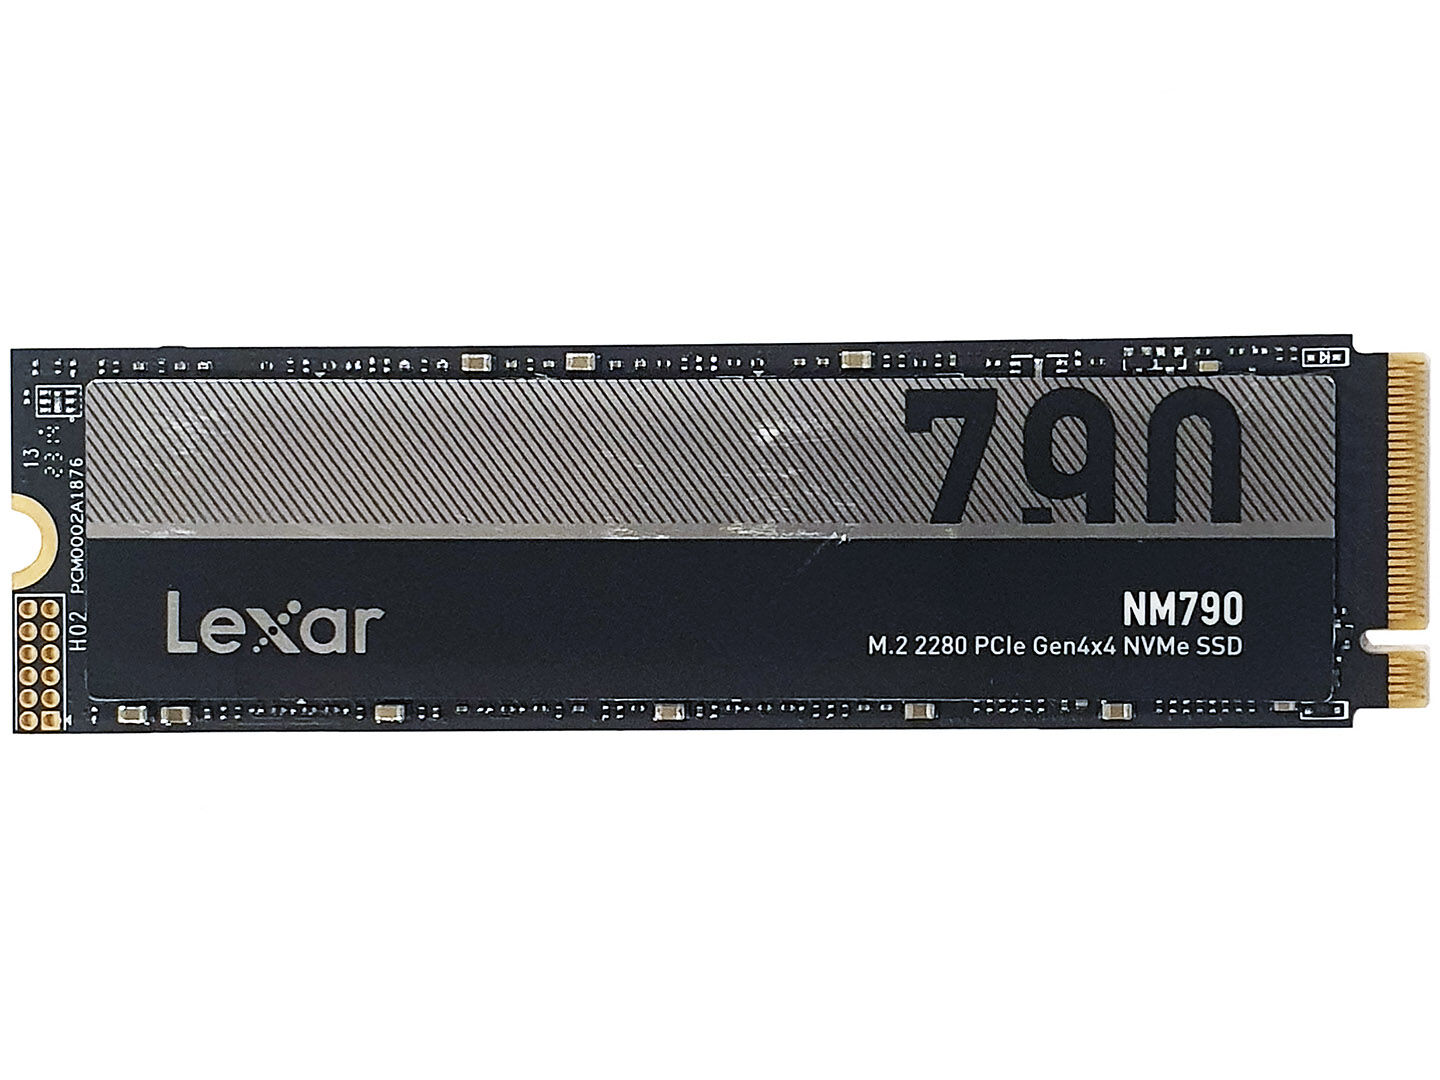 Lexar NM790 4TB review: A solid PS5 SSD - Dexerto